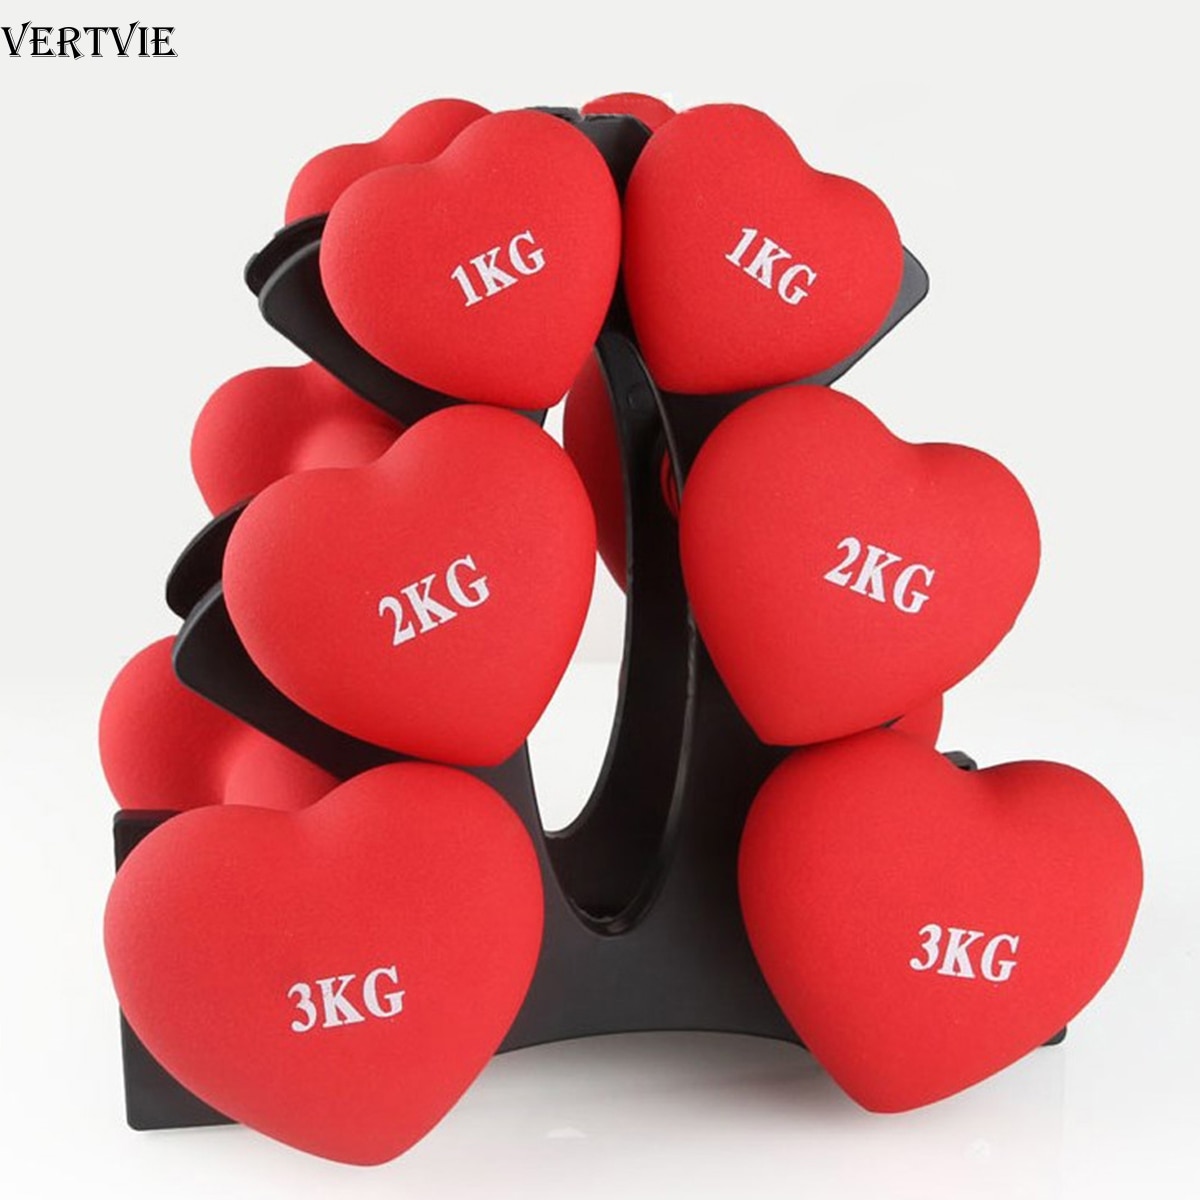 Dumbbell Storage Rack Stand 3-layer Hand-held Dumbbell Storage Rack For Home Office Gym Sport Exercise Accessories